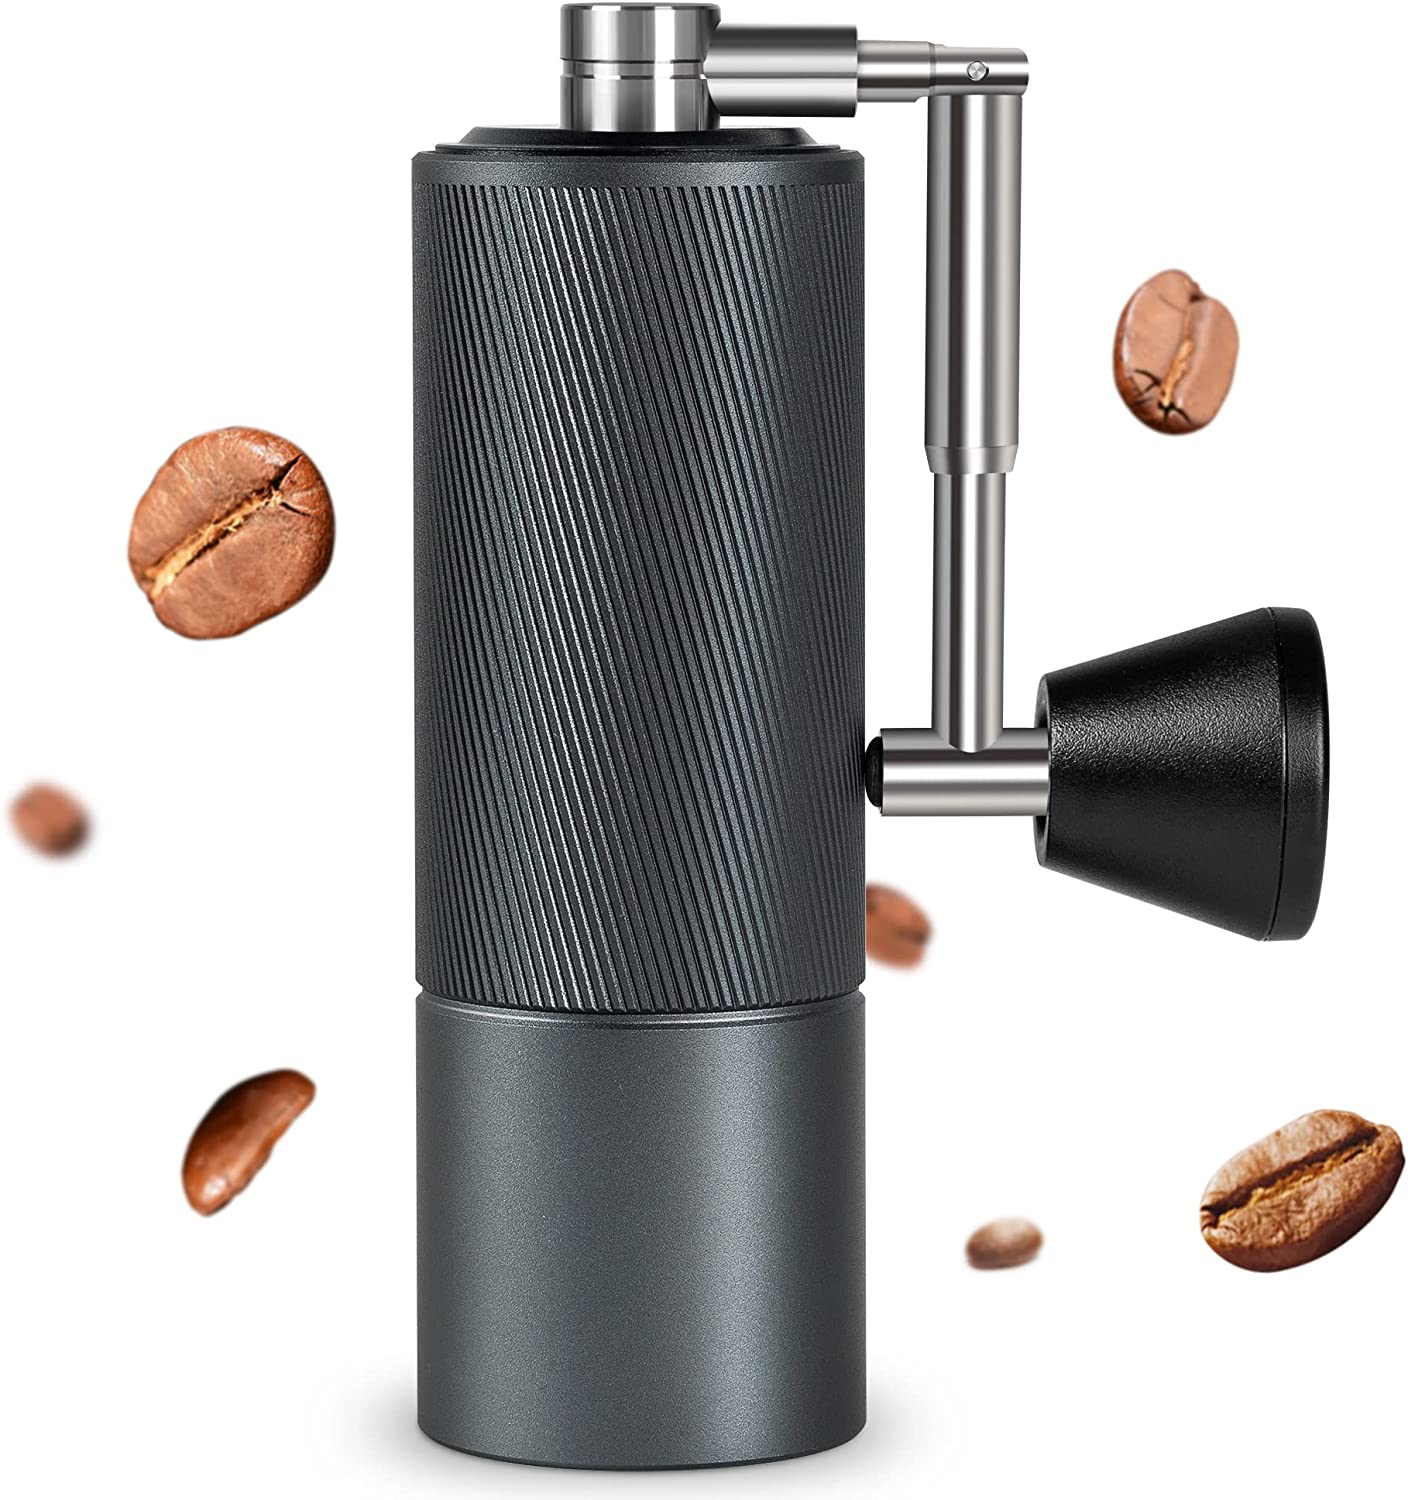 TIMEMORE Chestnut C2 Fold Coffee Grinder Manual with Folding Handle, Adjustable Conical Coffee Grinder, Stainless Steel Hand Coffee Grinder for Pour Over Coffee, French Press, Dark Grey